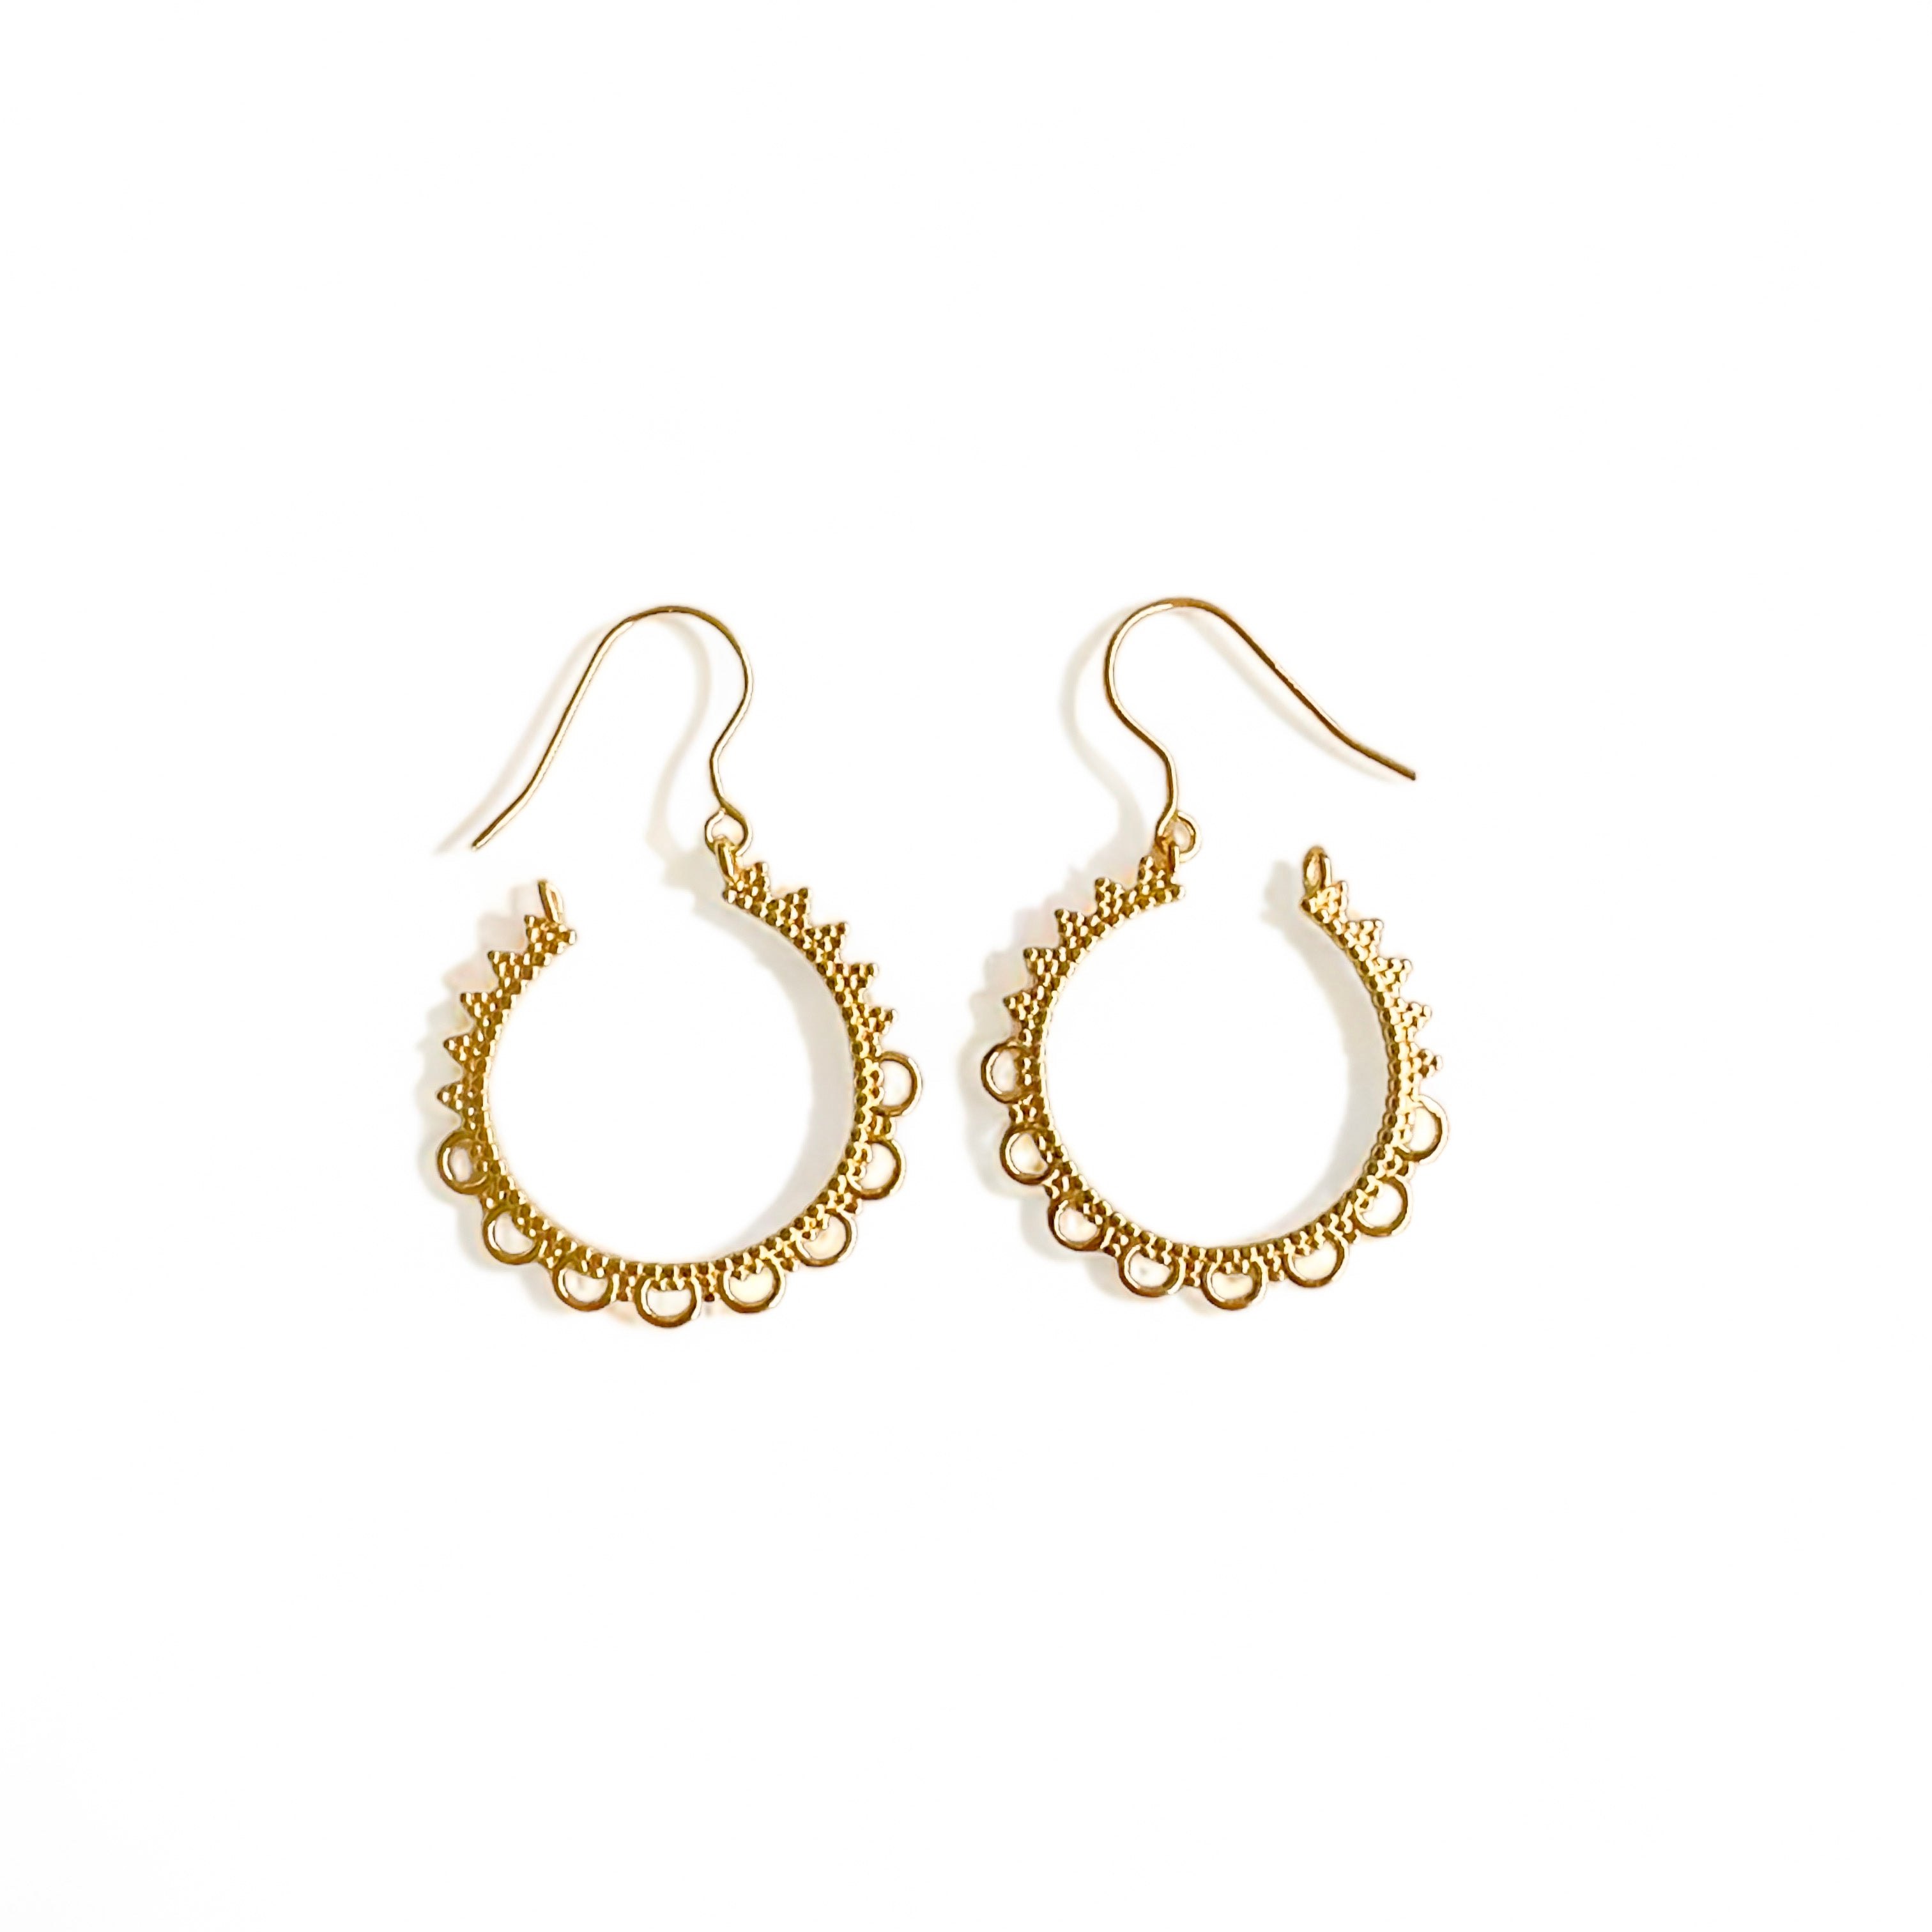 Elegant Lacy Vintage Hoop Earrings by Alessandra James, featuring delicate scalloped edging for a feminine touch.